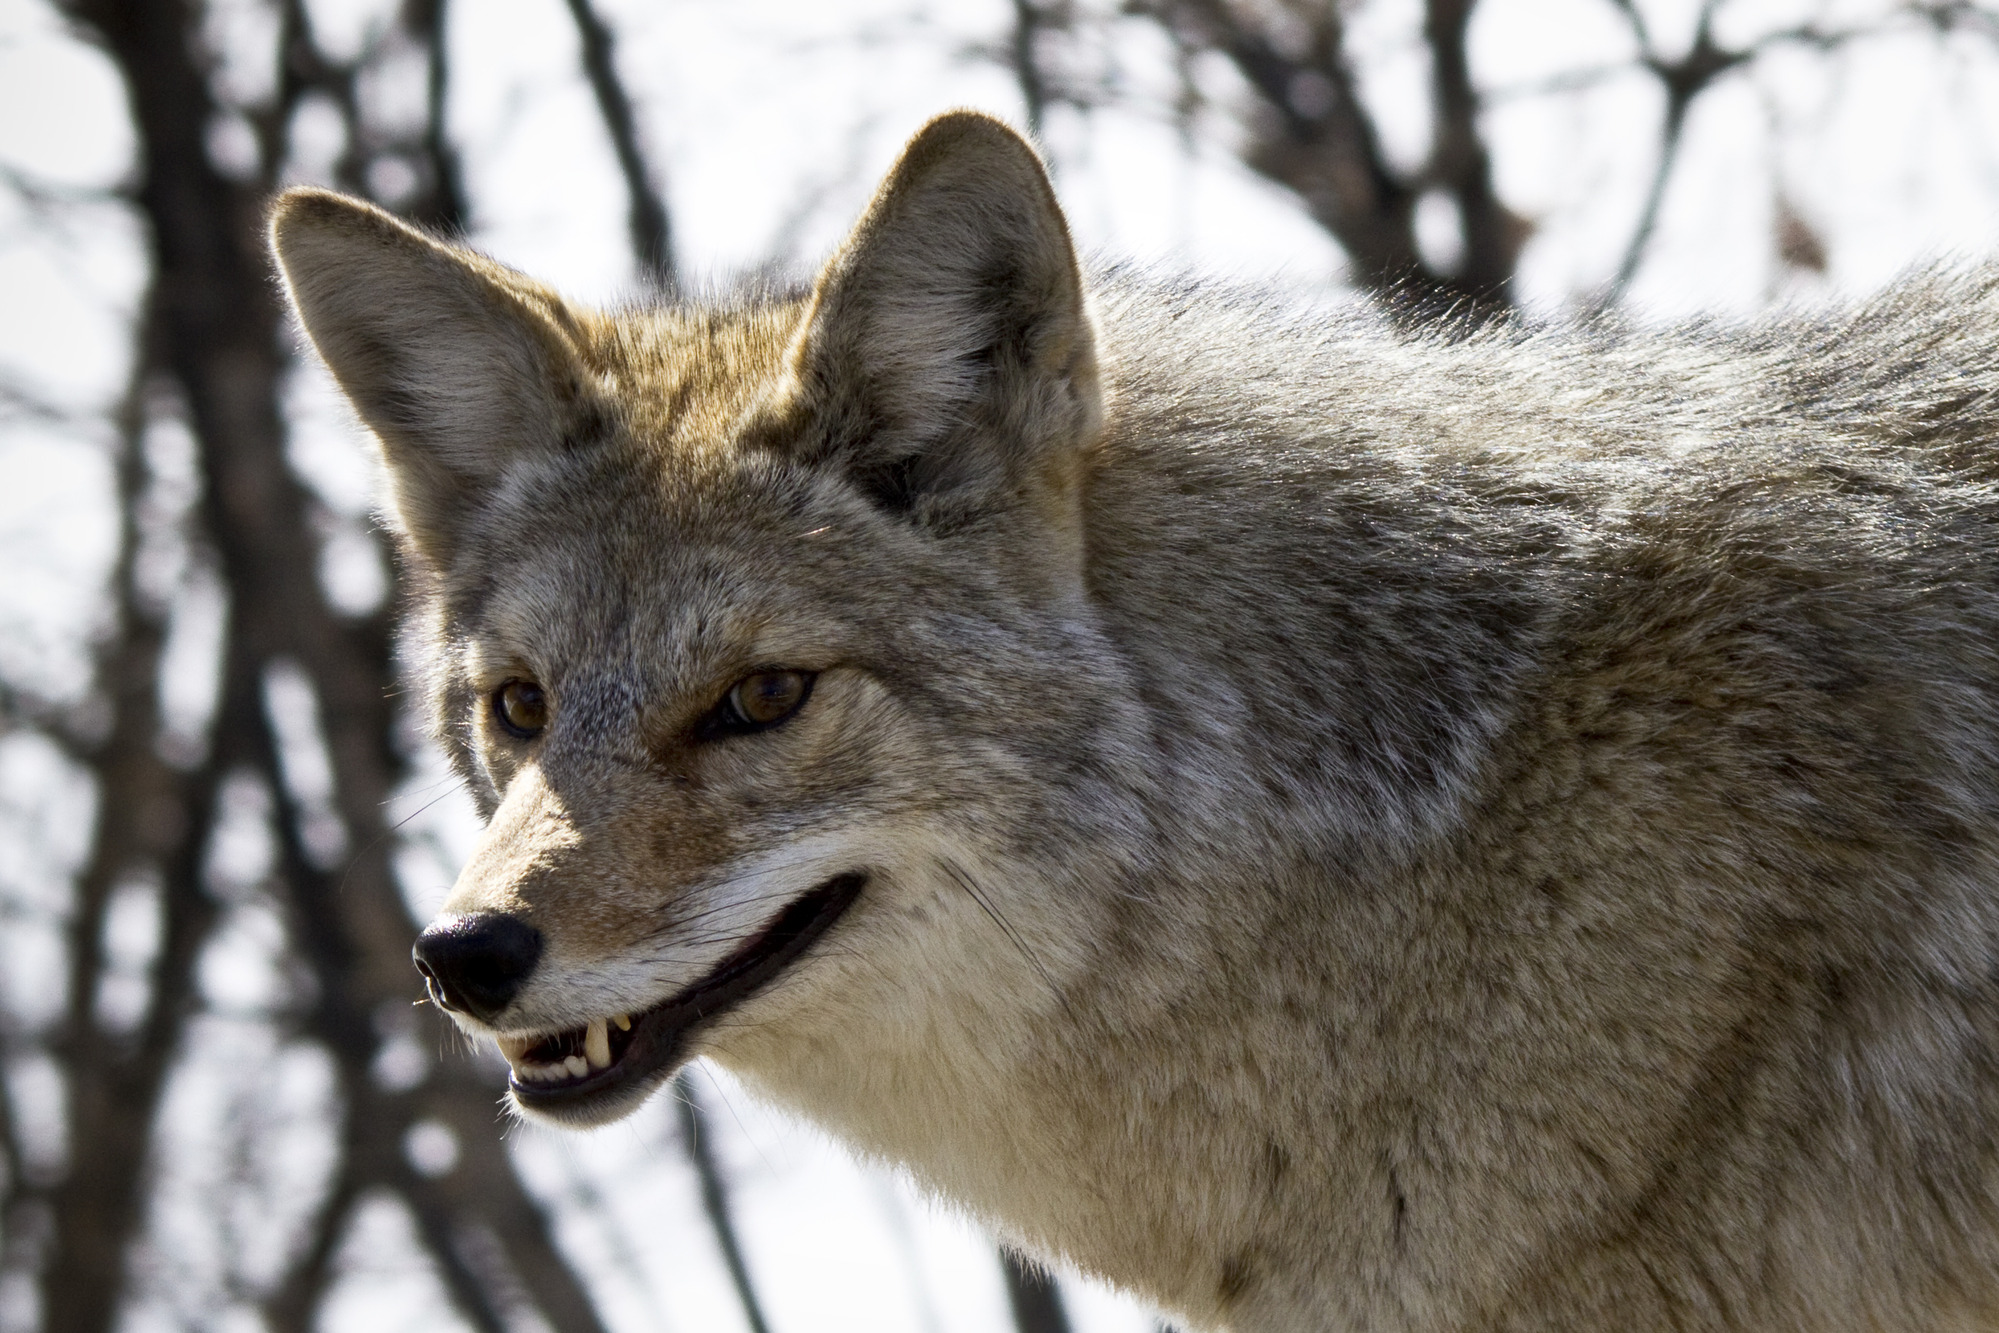 One distinguishing feature for coyotes is that their ears are quite large relative to their head size, while wolf ears are much smaller, relatively.